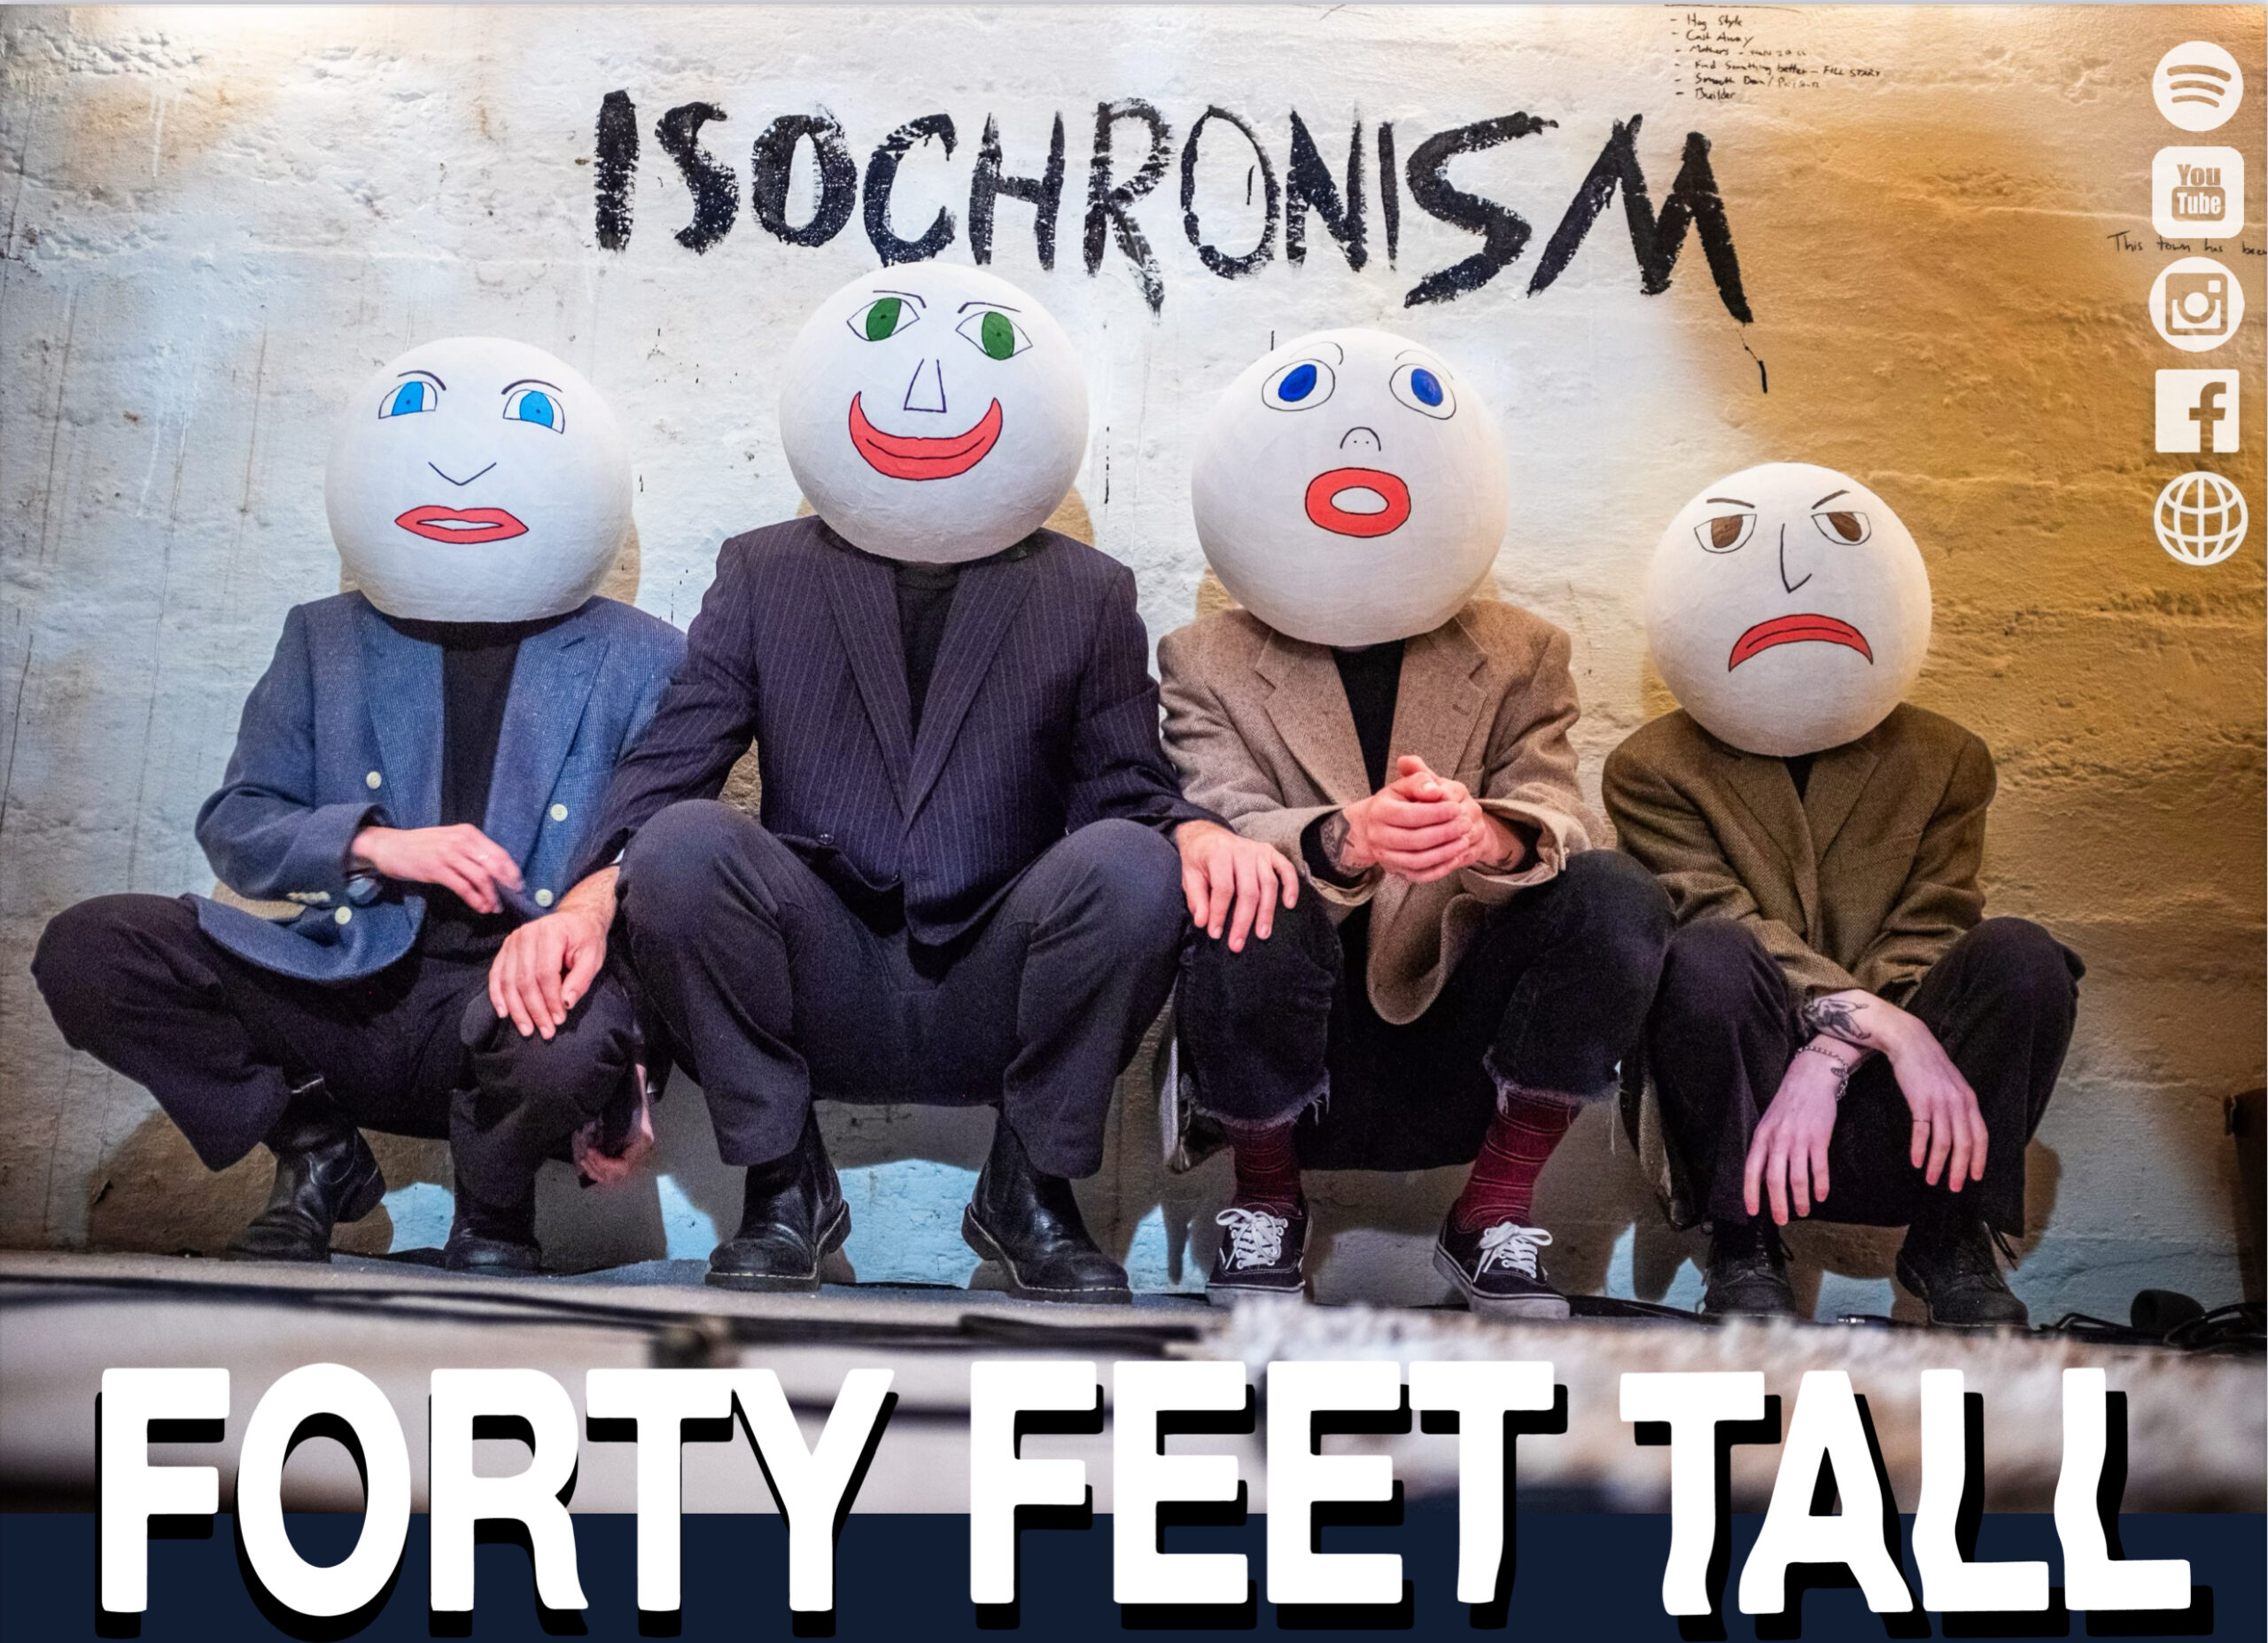 Experience the Mesmerizing Magic of Forty Feet Tall’s New Single “Isochronism”